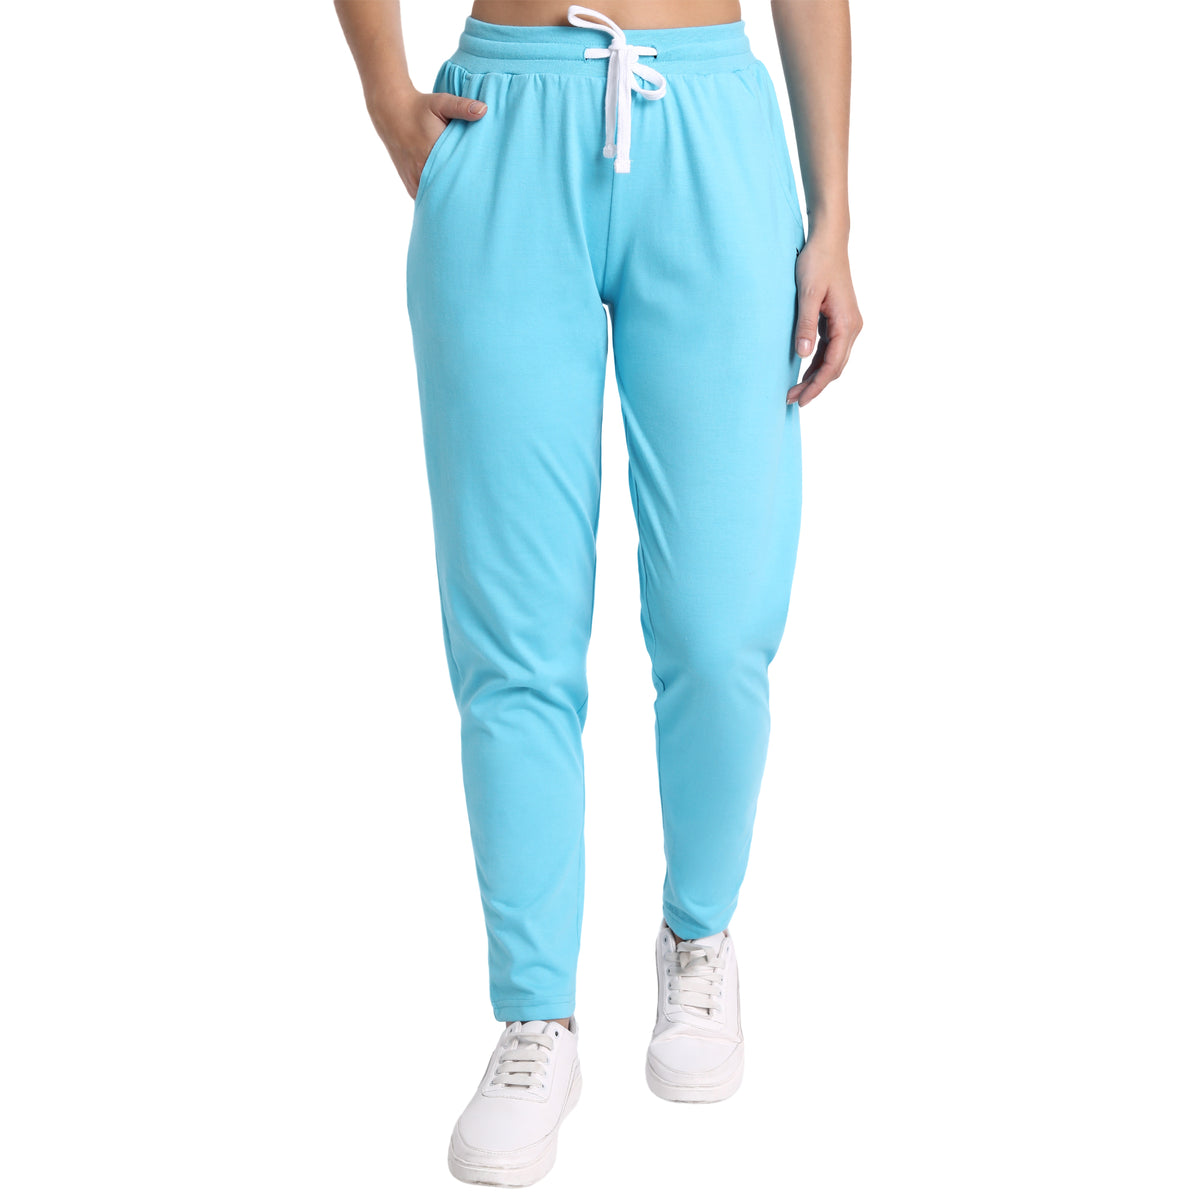 High-Quality Cotton Track Pants for Women